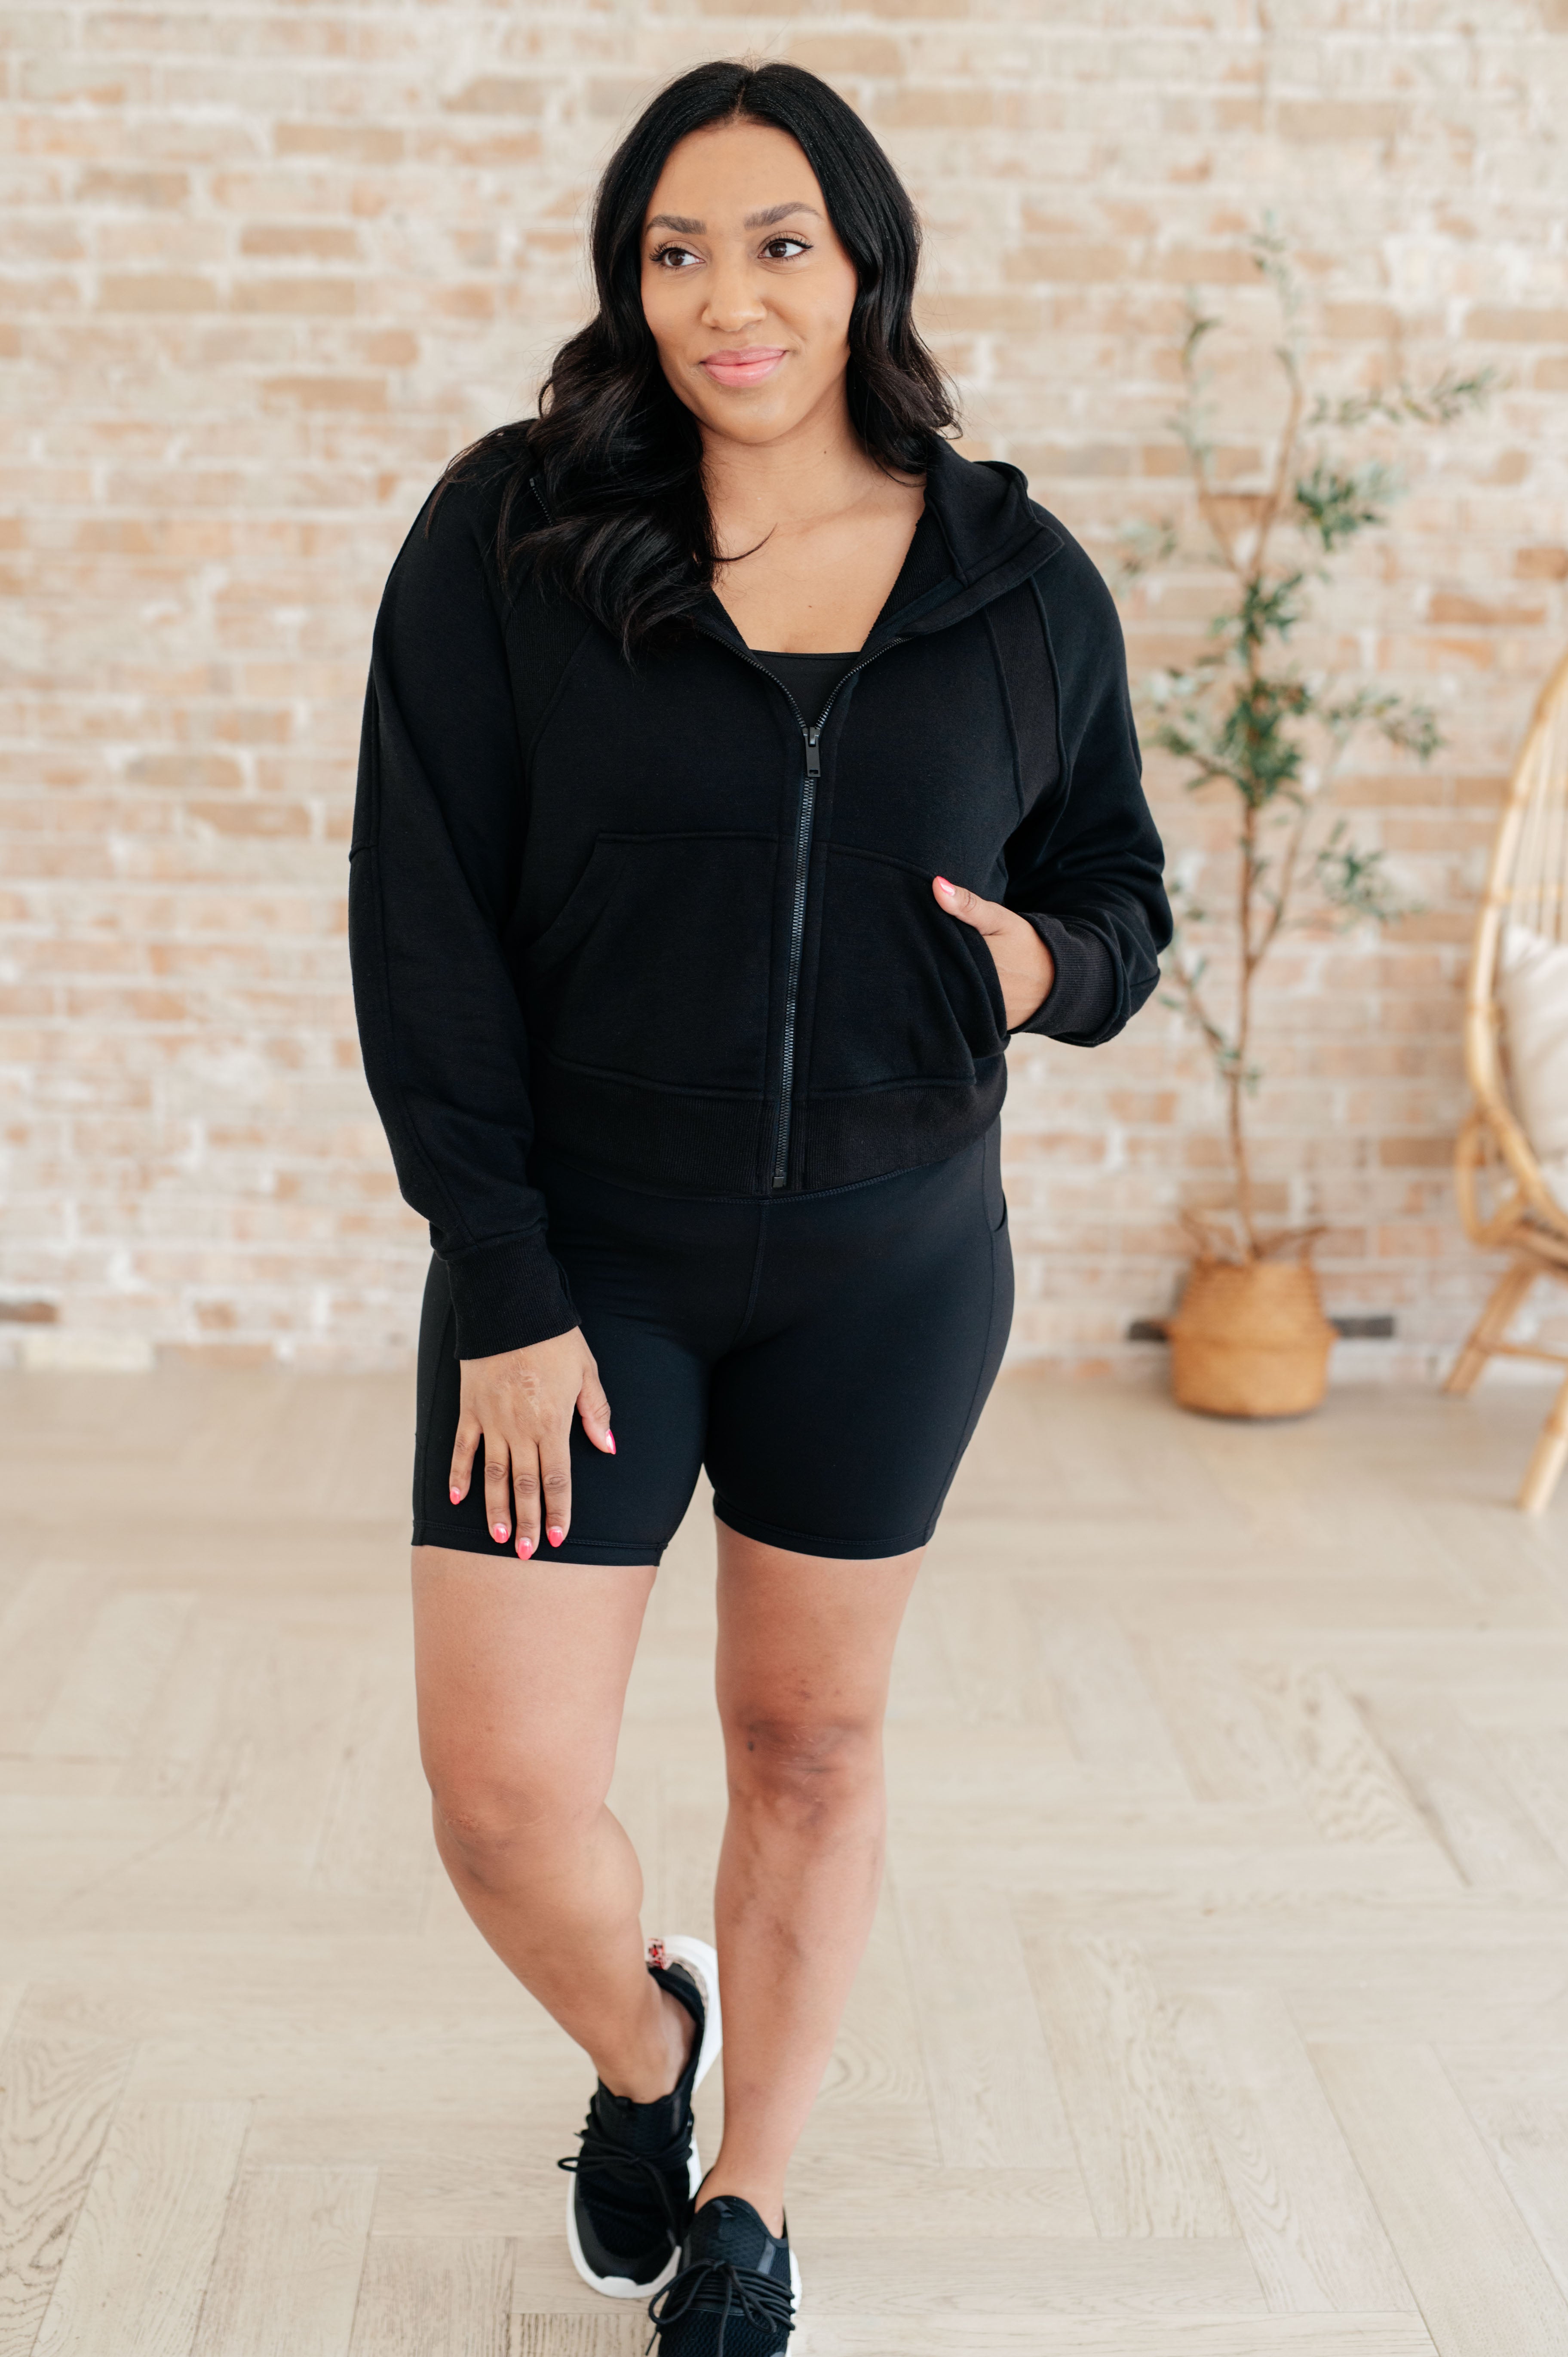 Rae Mode Sun or Shade Zip Up Jacket in Black Ave Shops